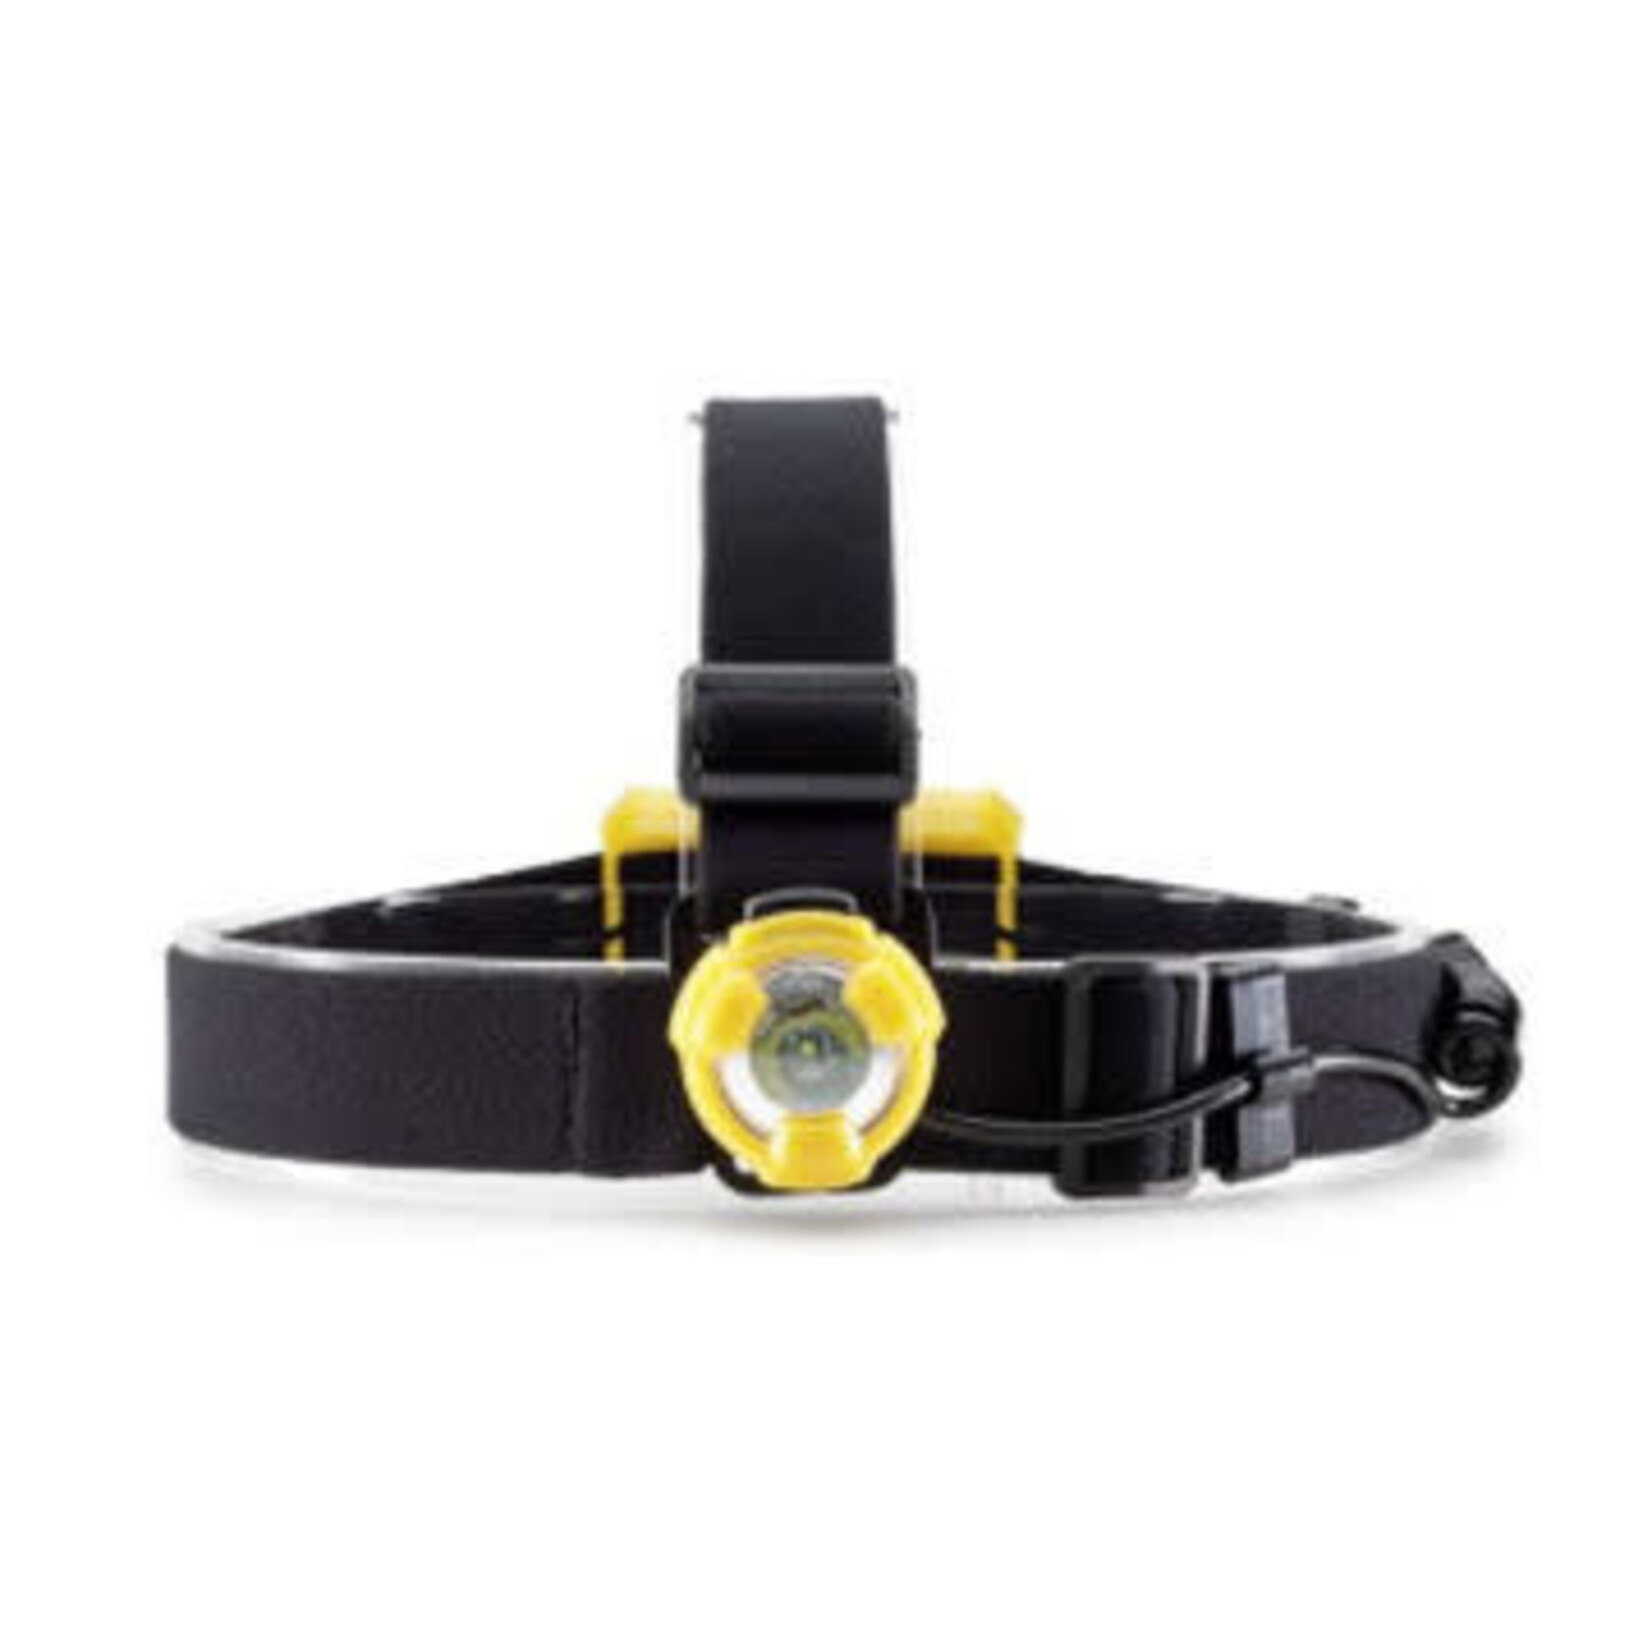 head lamp outdoor products